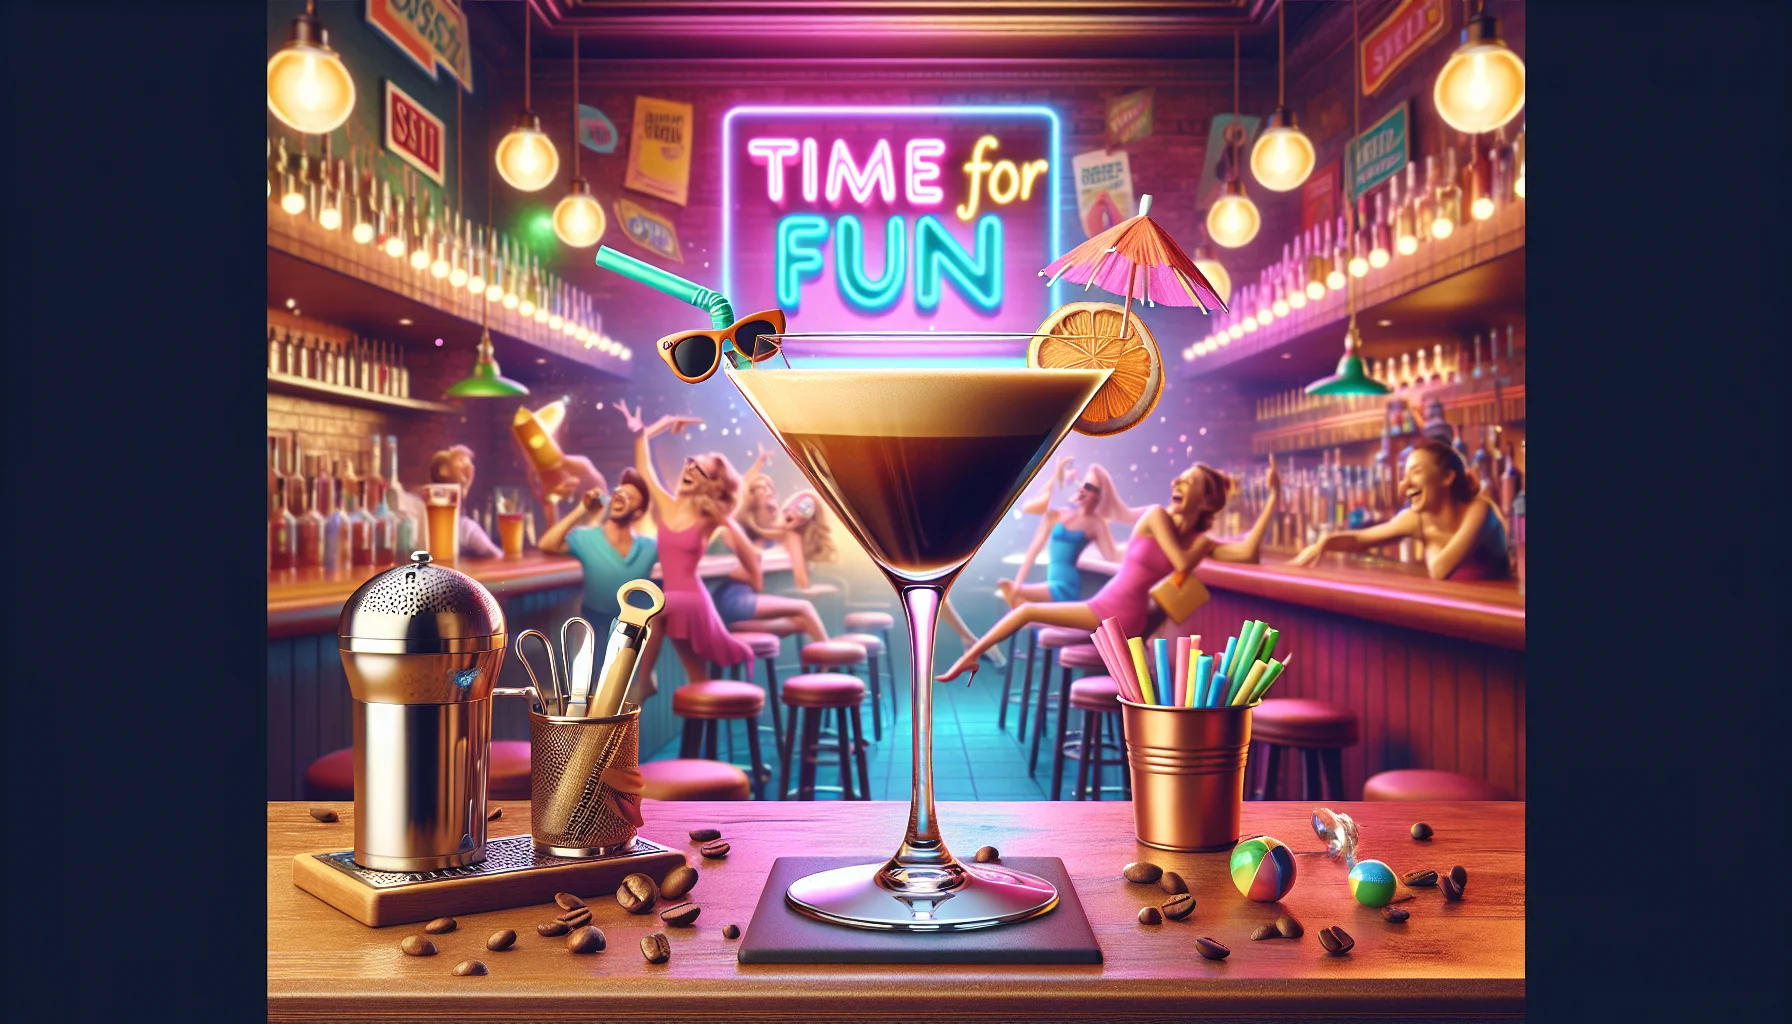 Create an image showcasing a humorously envisaged scenario revolving around a chilled espresso martini. Set in a lively and whimsical bar setting, the espresso martini glass takes on a life of its own, wearing a pair of sunglasses and waving a tiny cocktail umbrella. A neon sign in the background reads, 'Time for Fun', and the atmosphere around the bar is filled with laughter and enjoyment. Use vivid and appealing colors to make the ambiance as inviting as possible, reflecting the idea of a great time associated with enjoying the beverage.